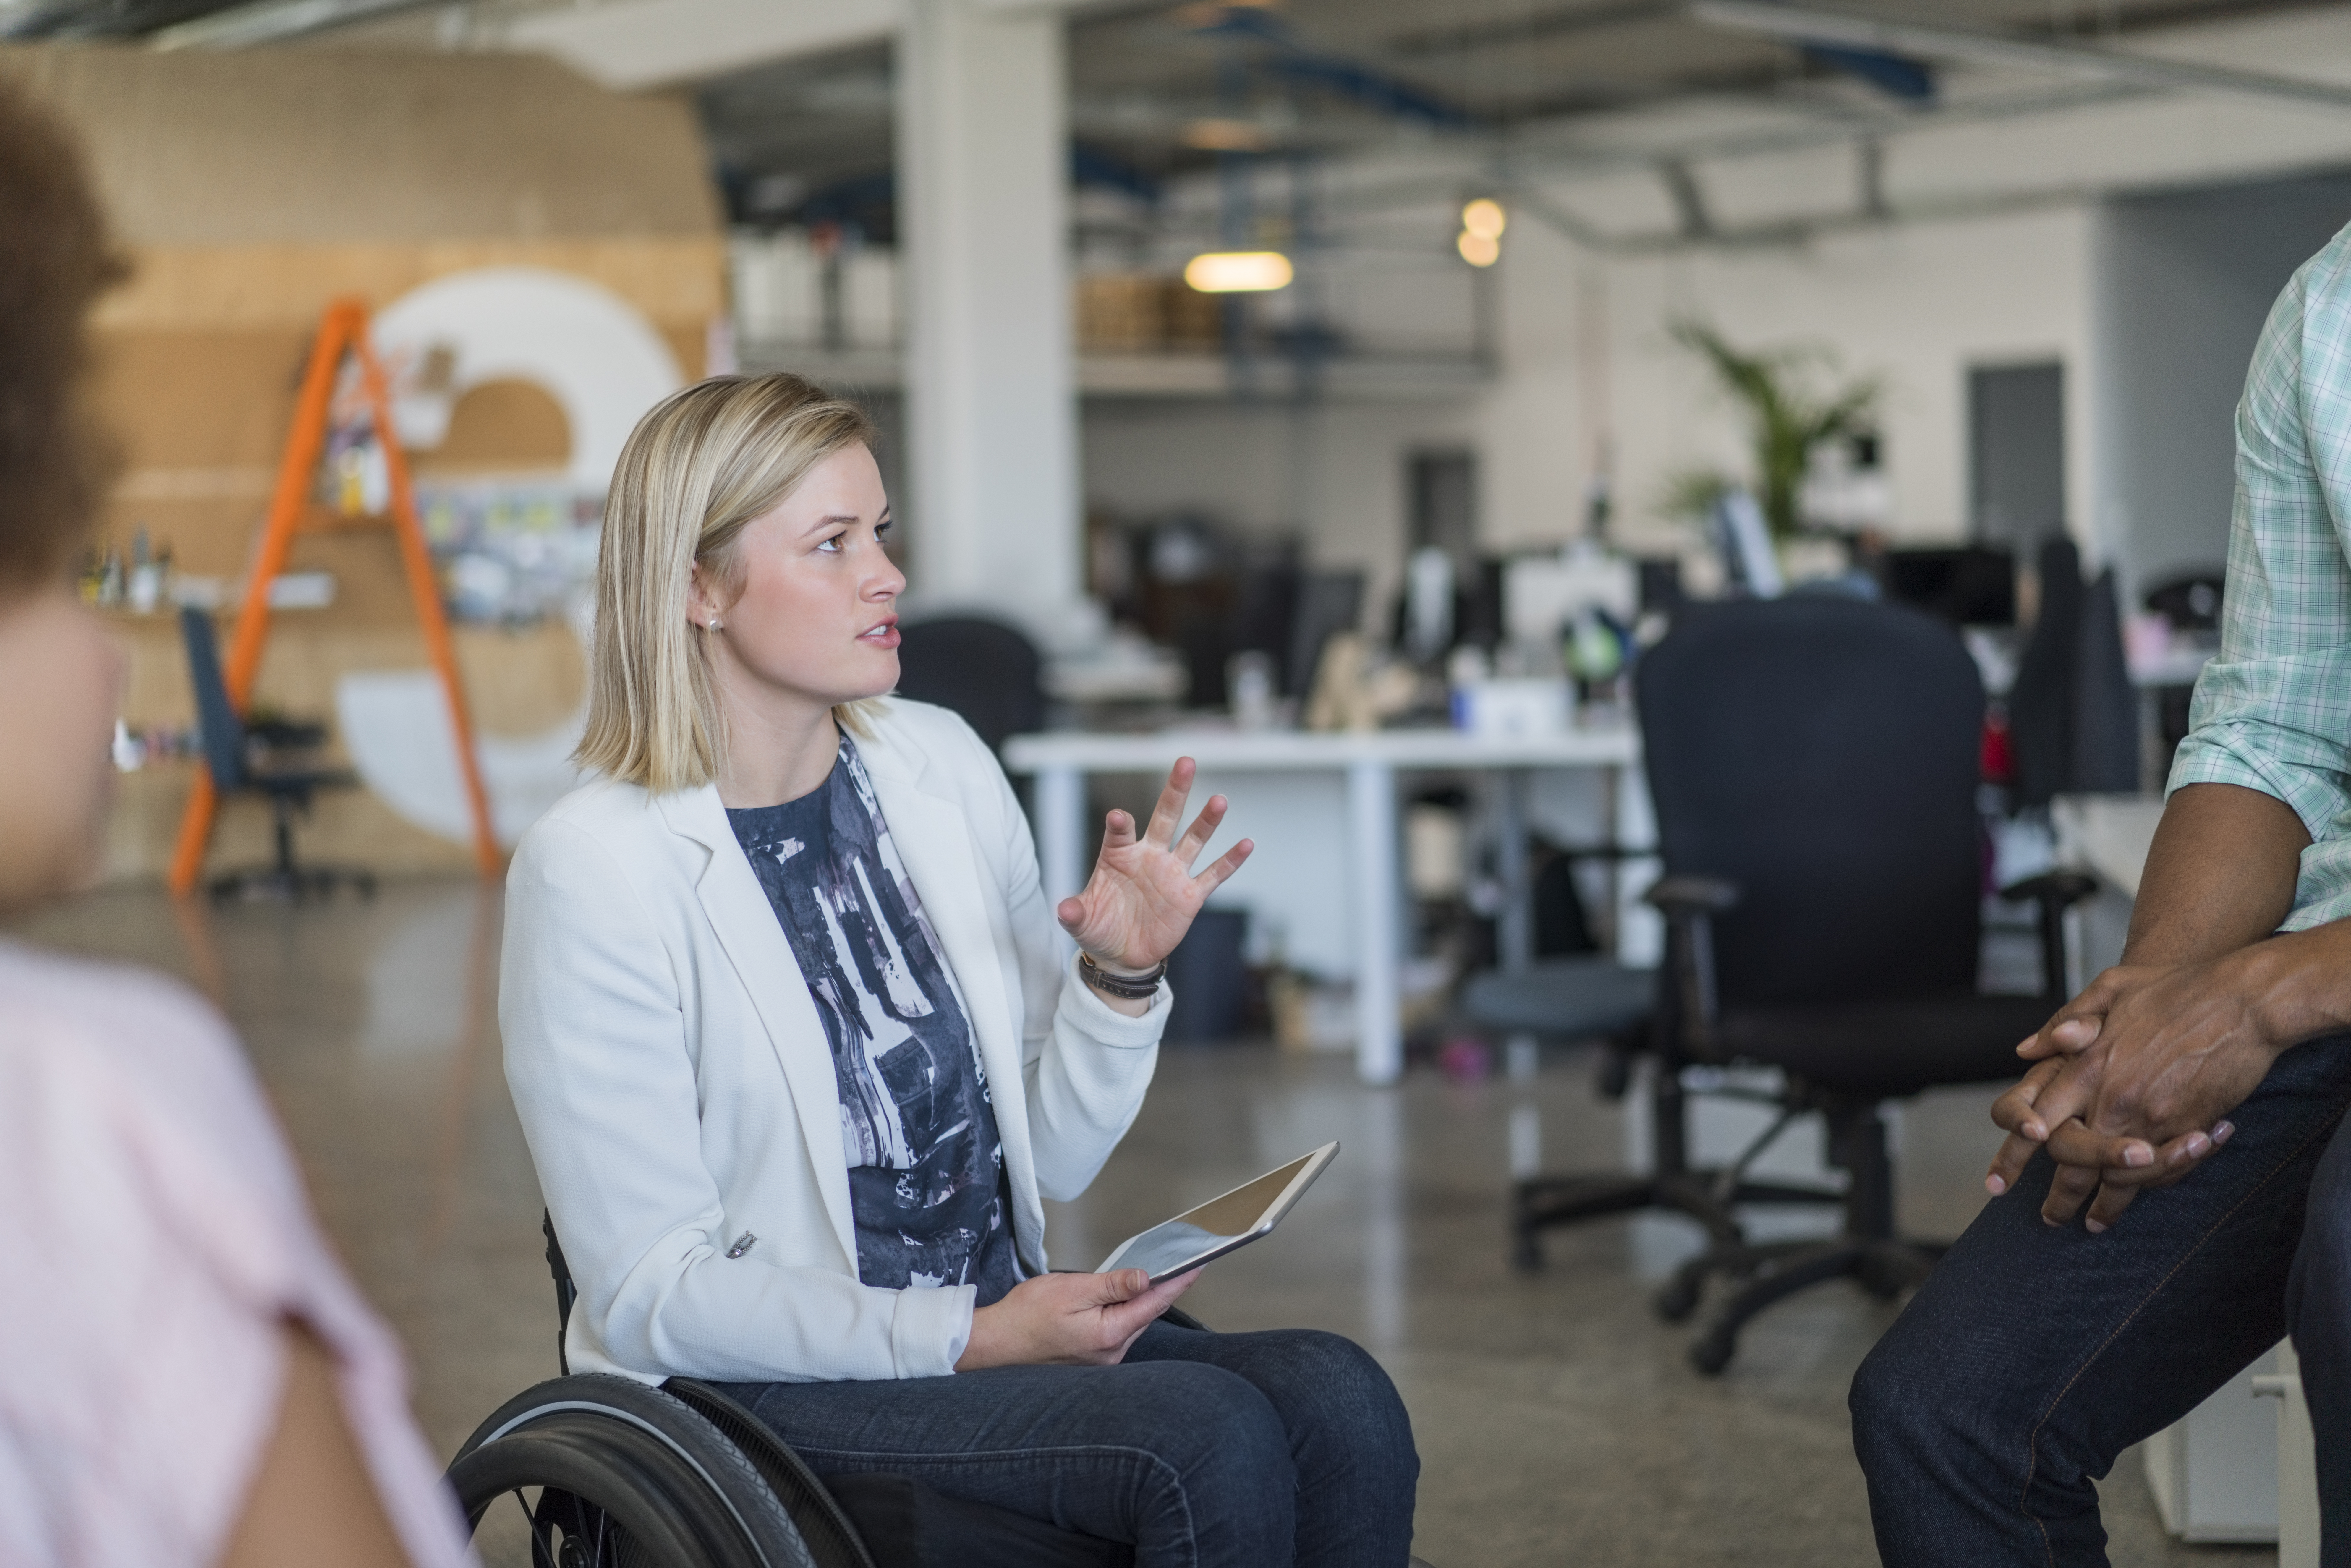 Disabled businesswoman discussing with colleagues in office. Female professionals is holding digital tablet in wheelchair. Executives are in meeting at workplace.